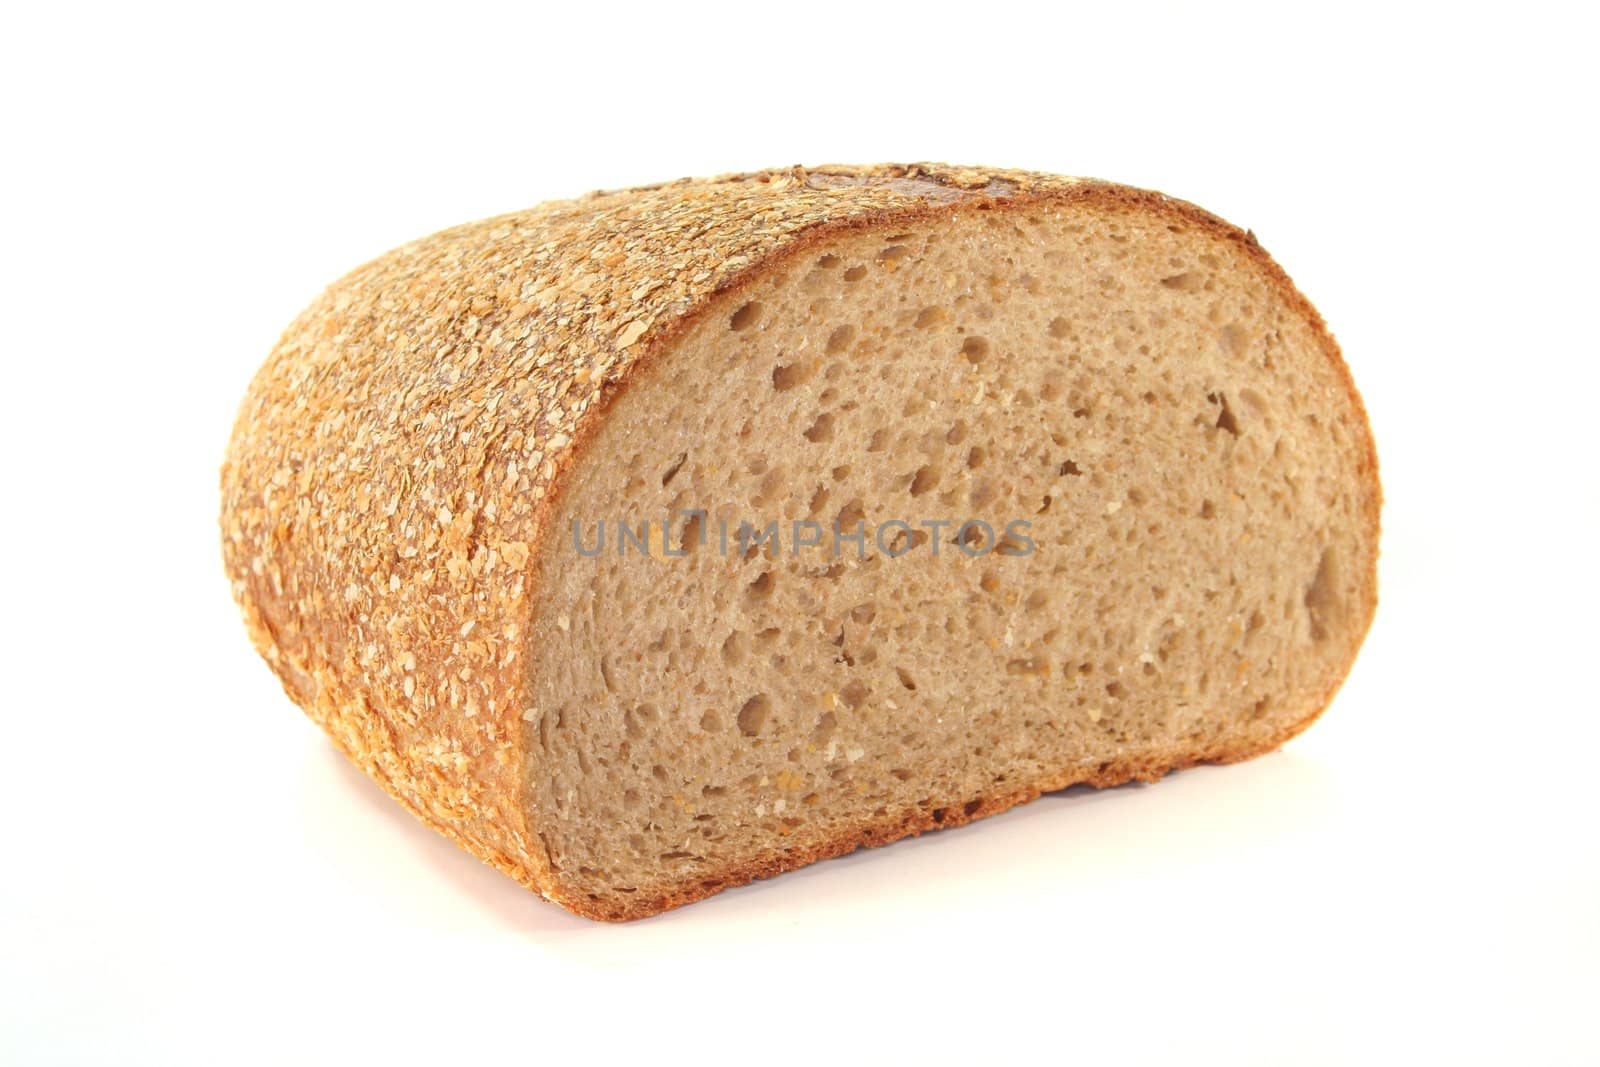 a crusty loaf of bread on a white background